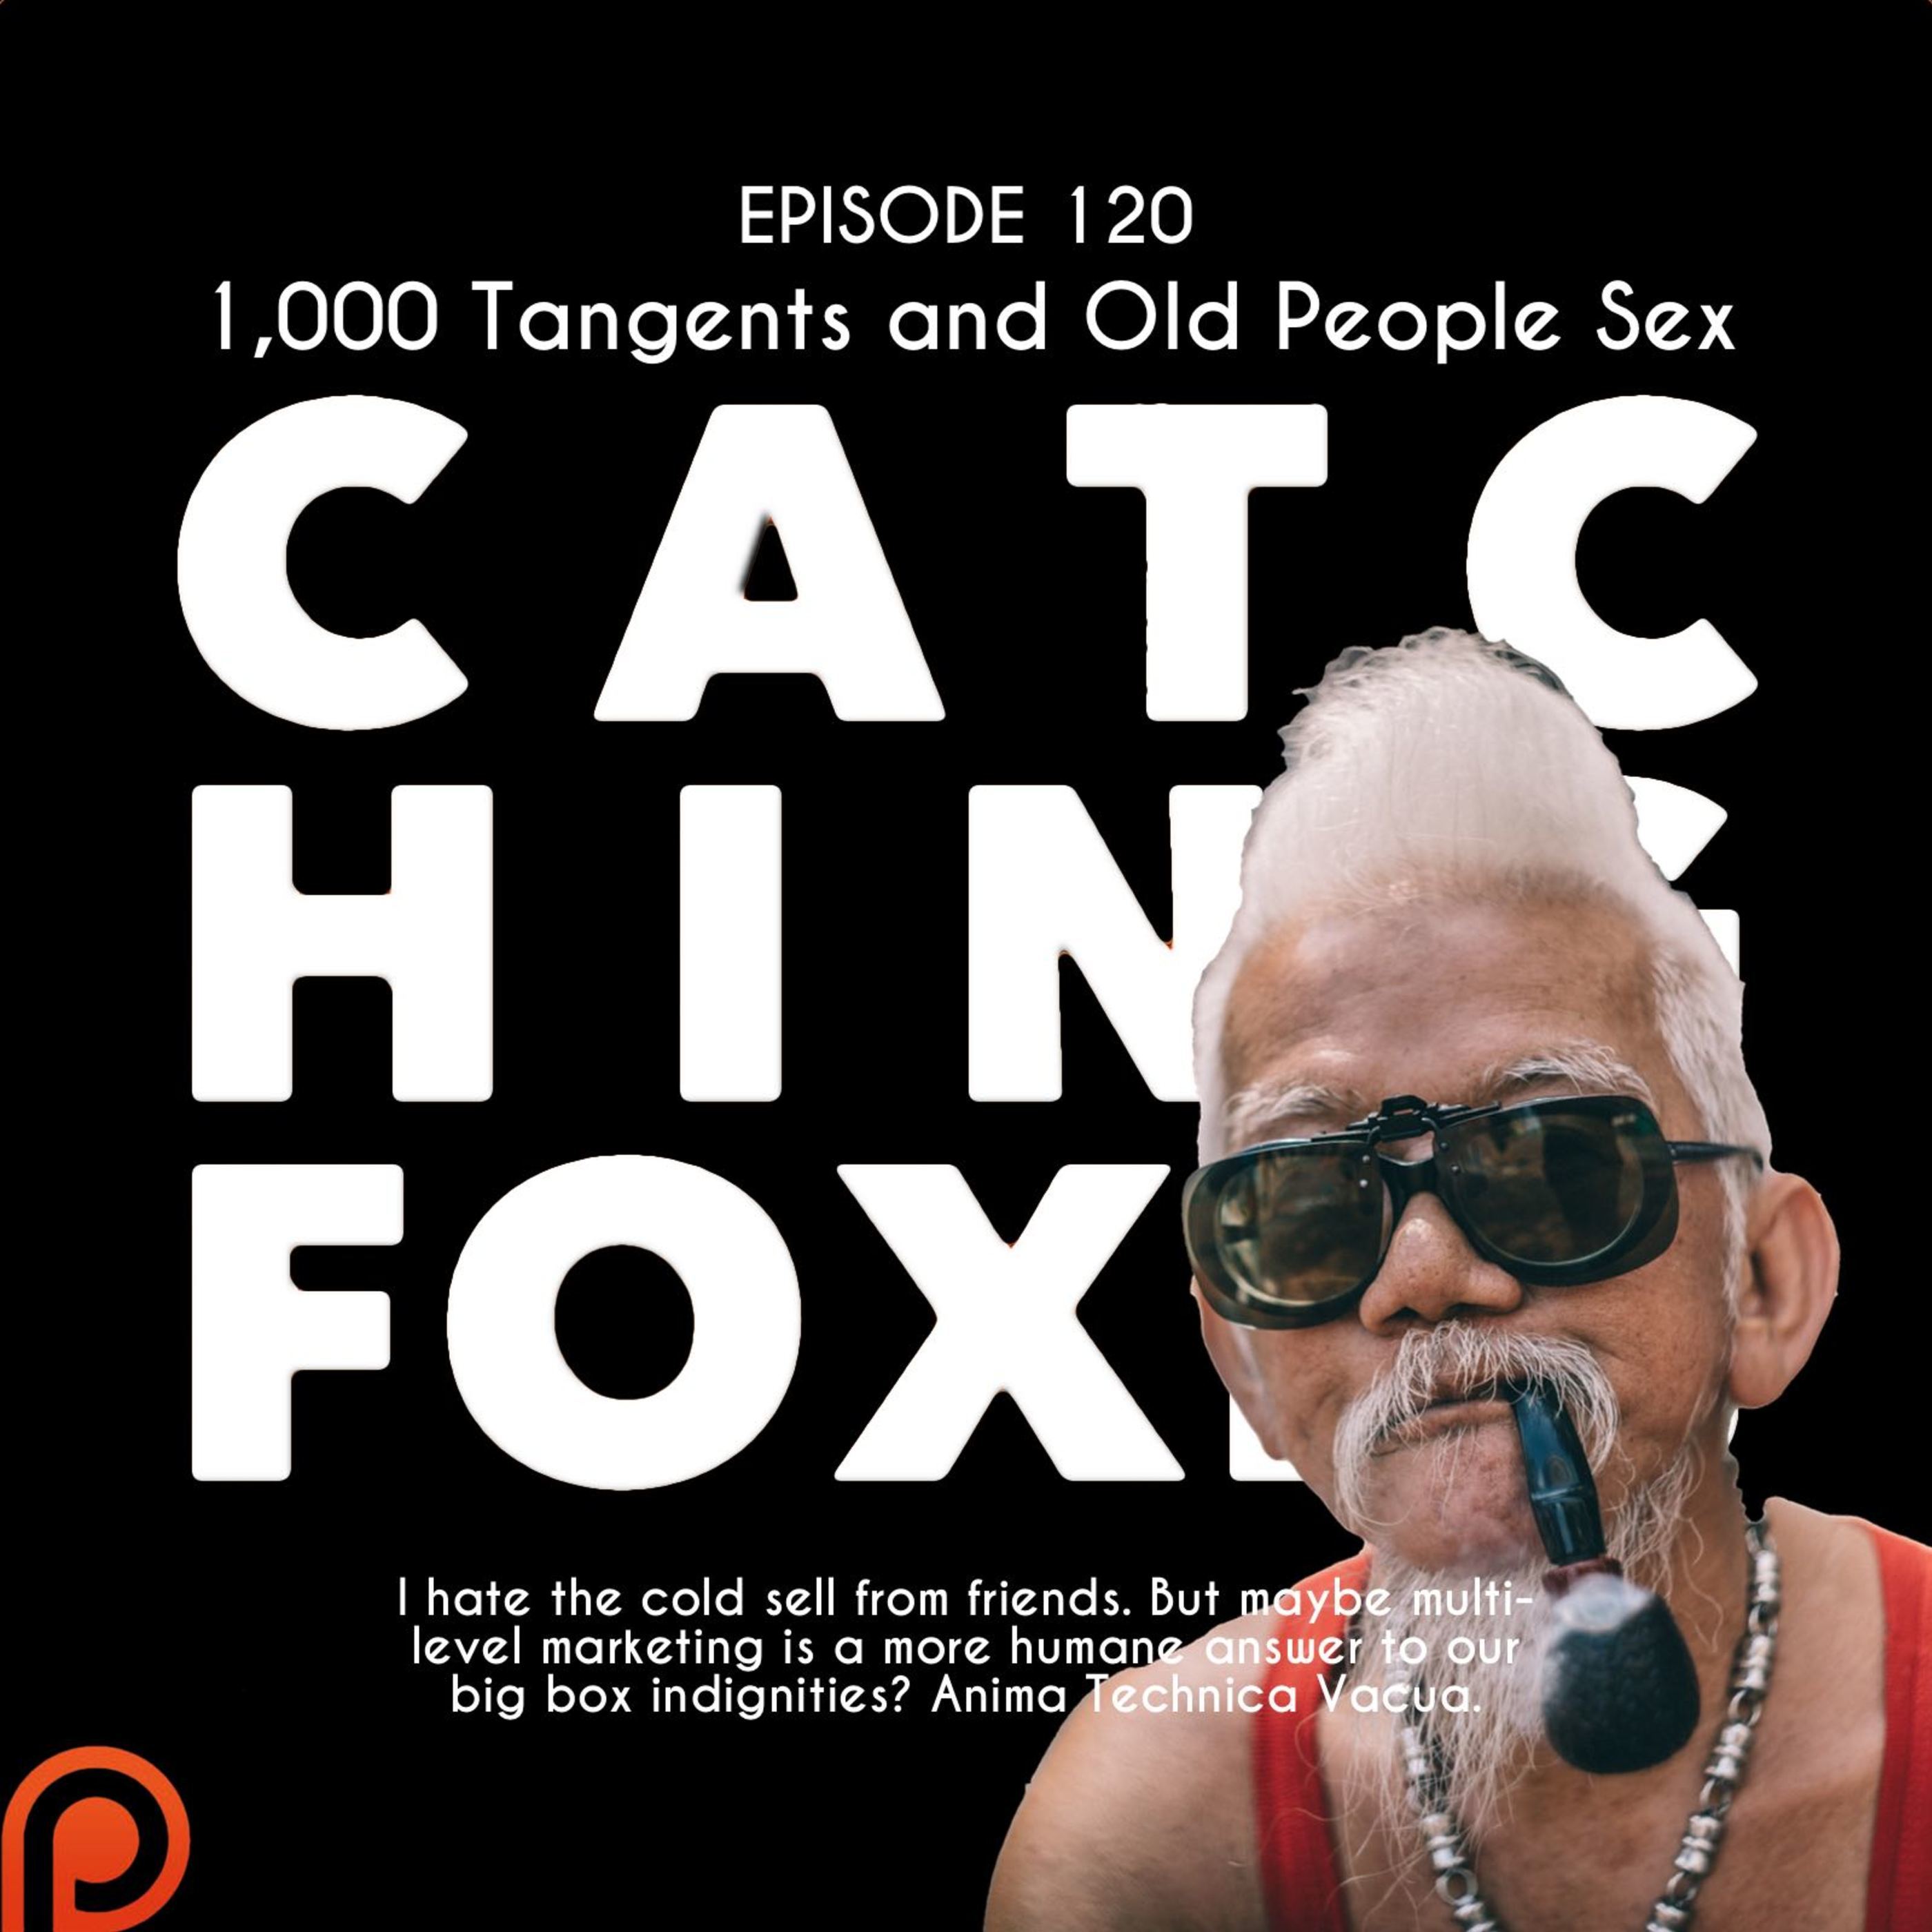 1,000 Tangents and Old People Sex